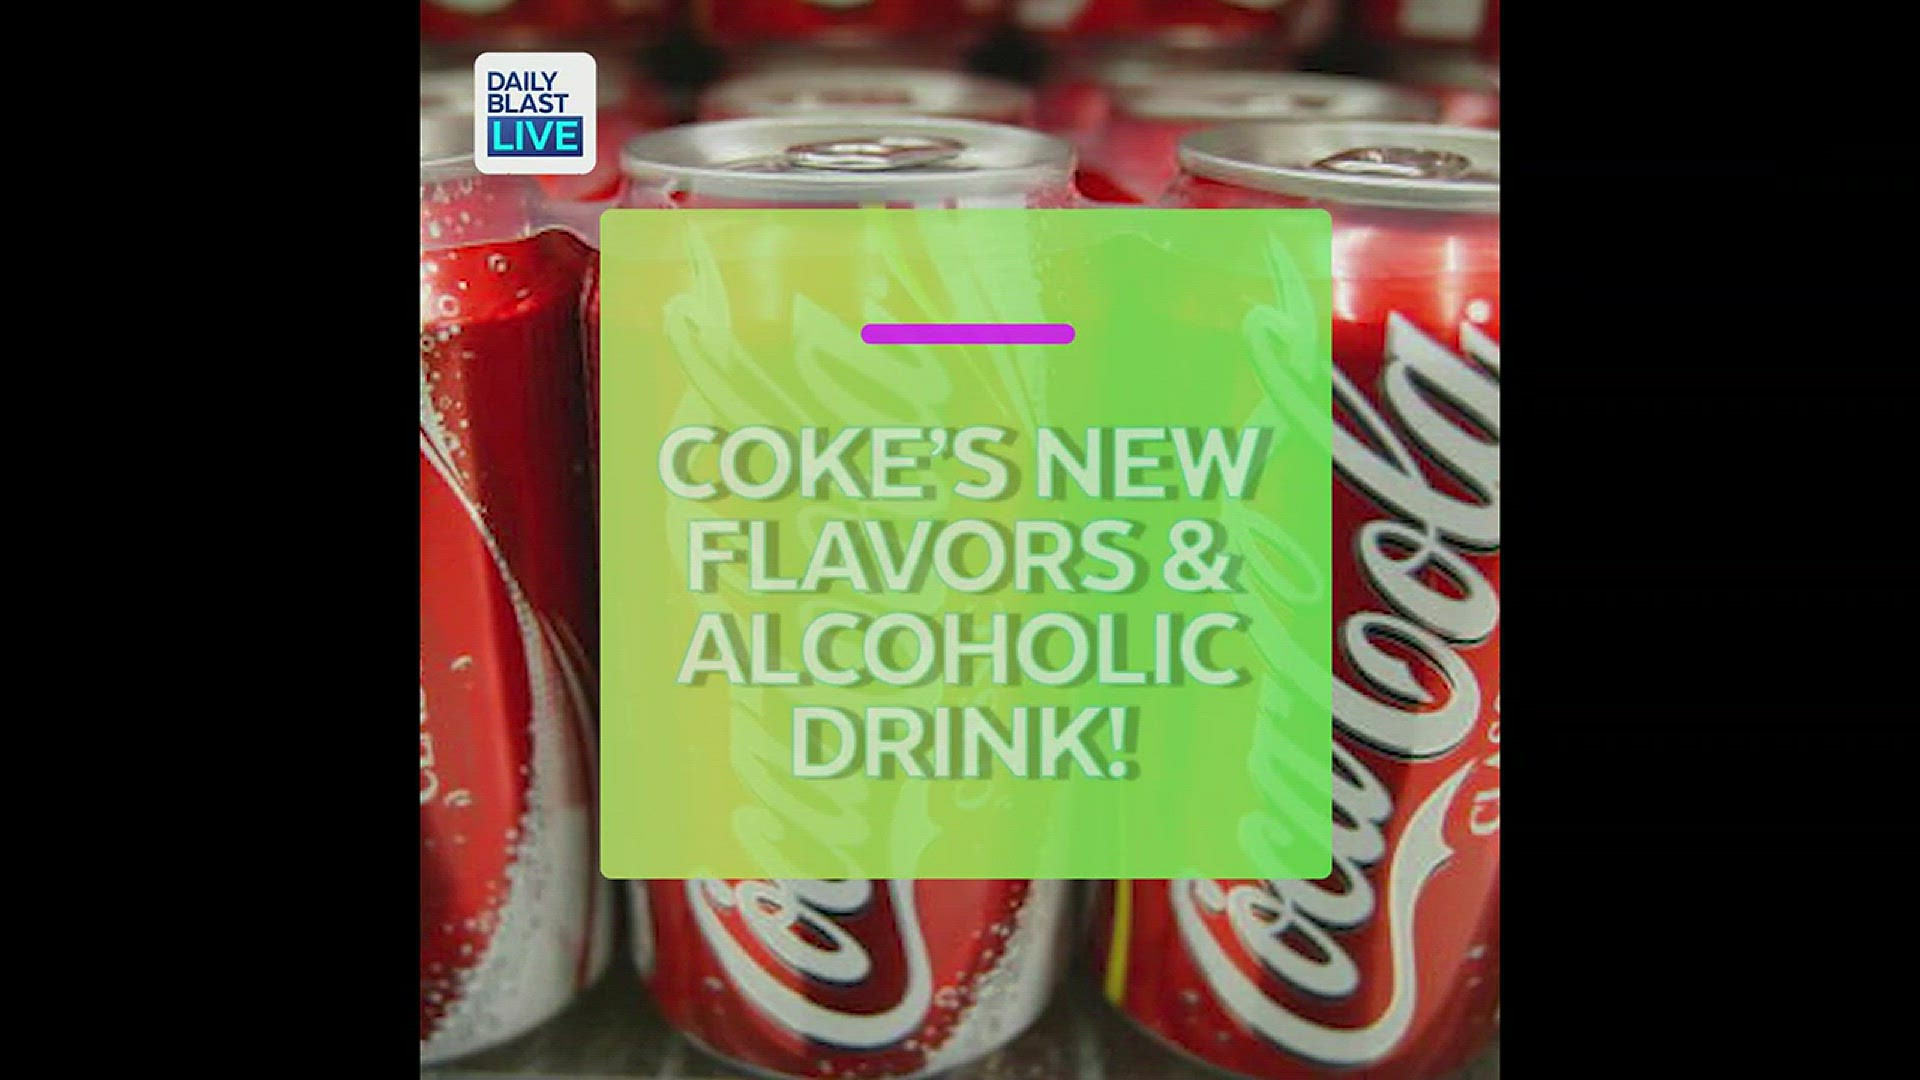 New delicious Coke flavors are coming our way!